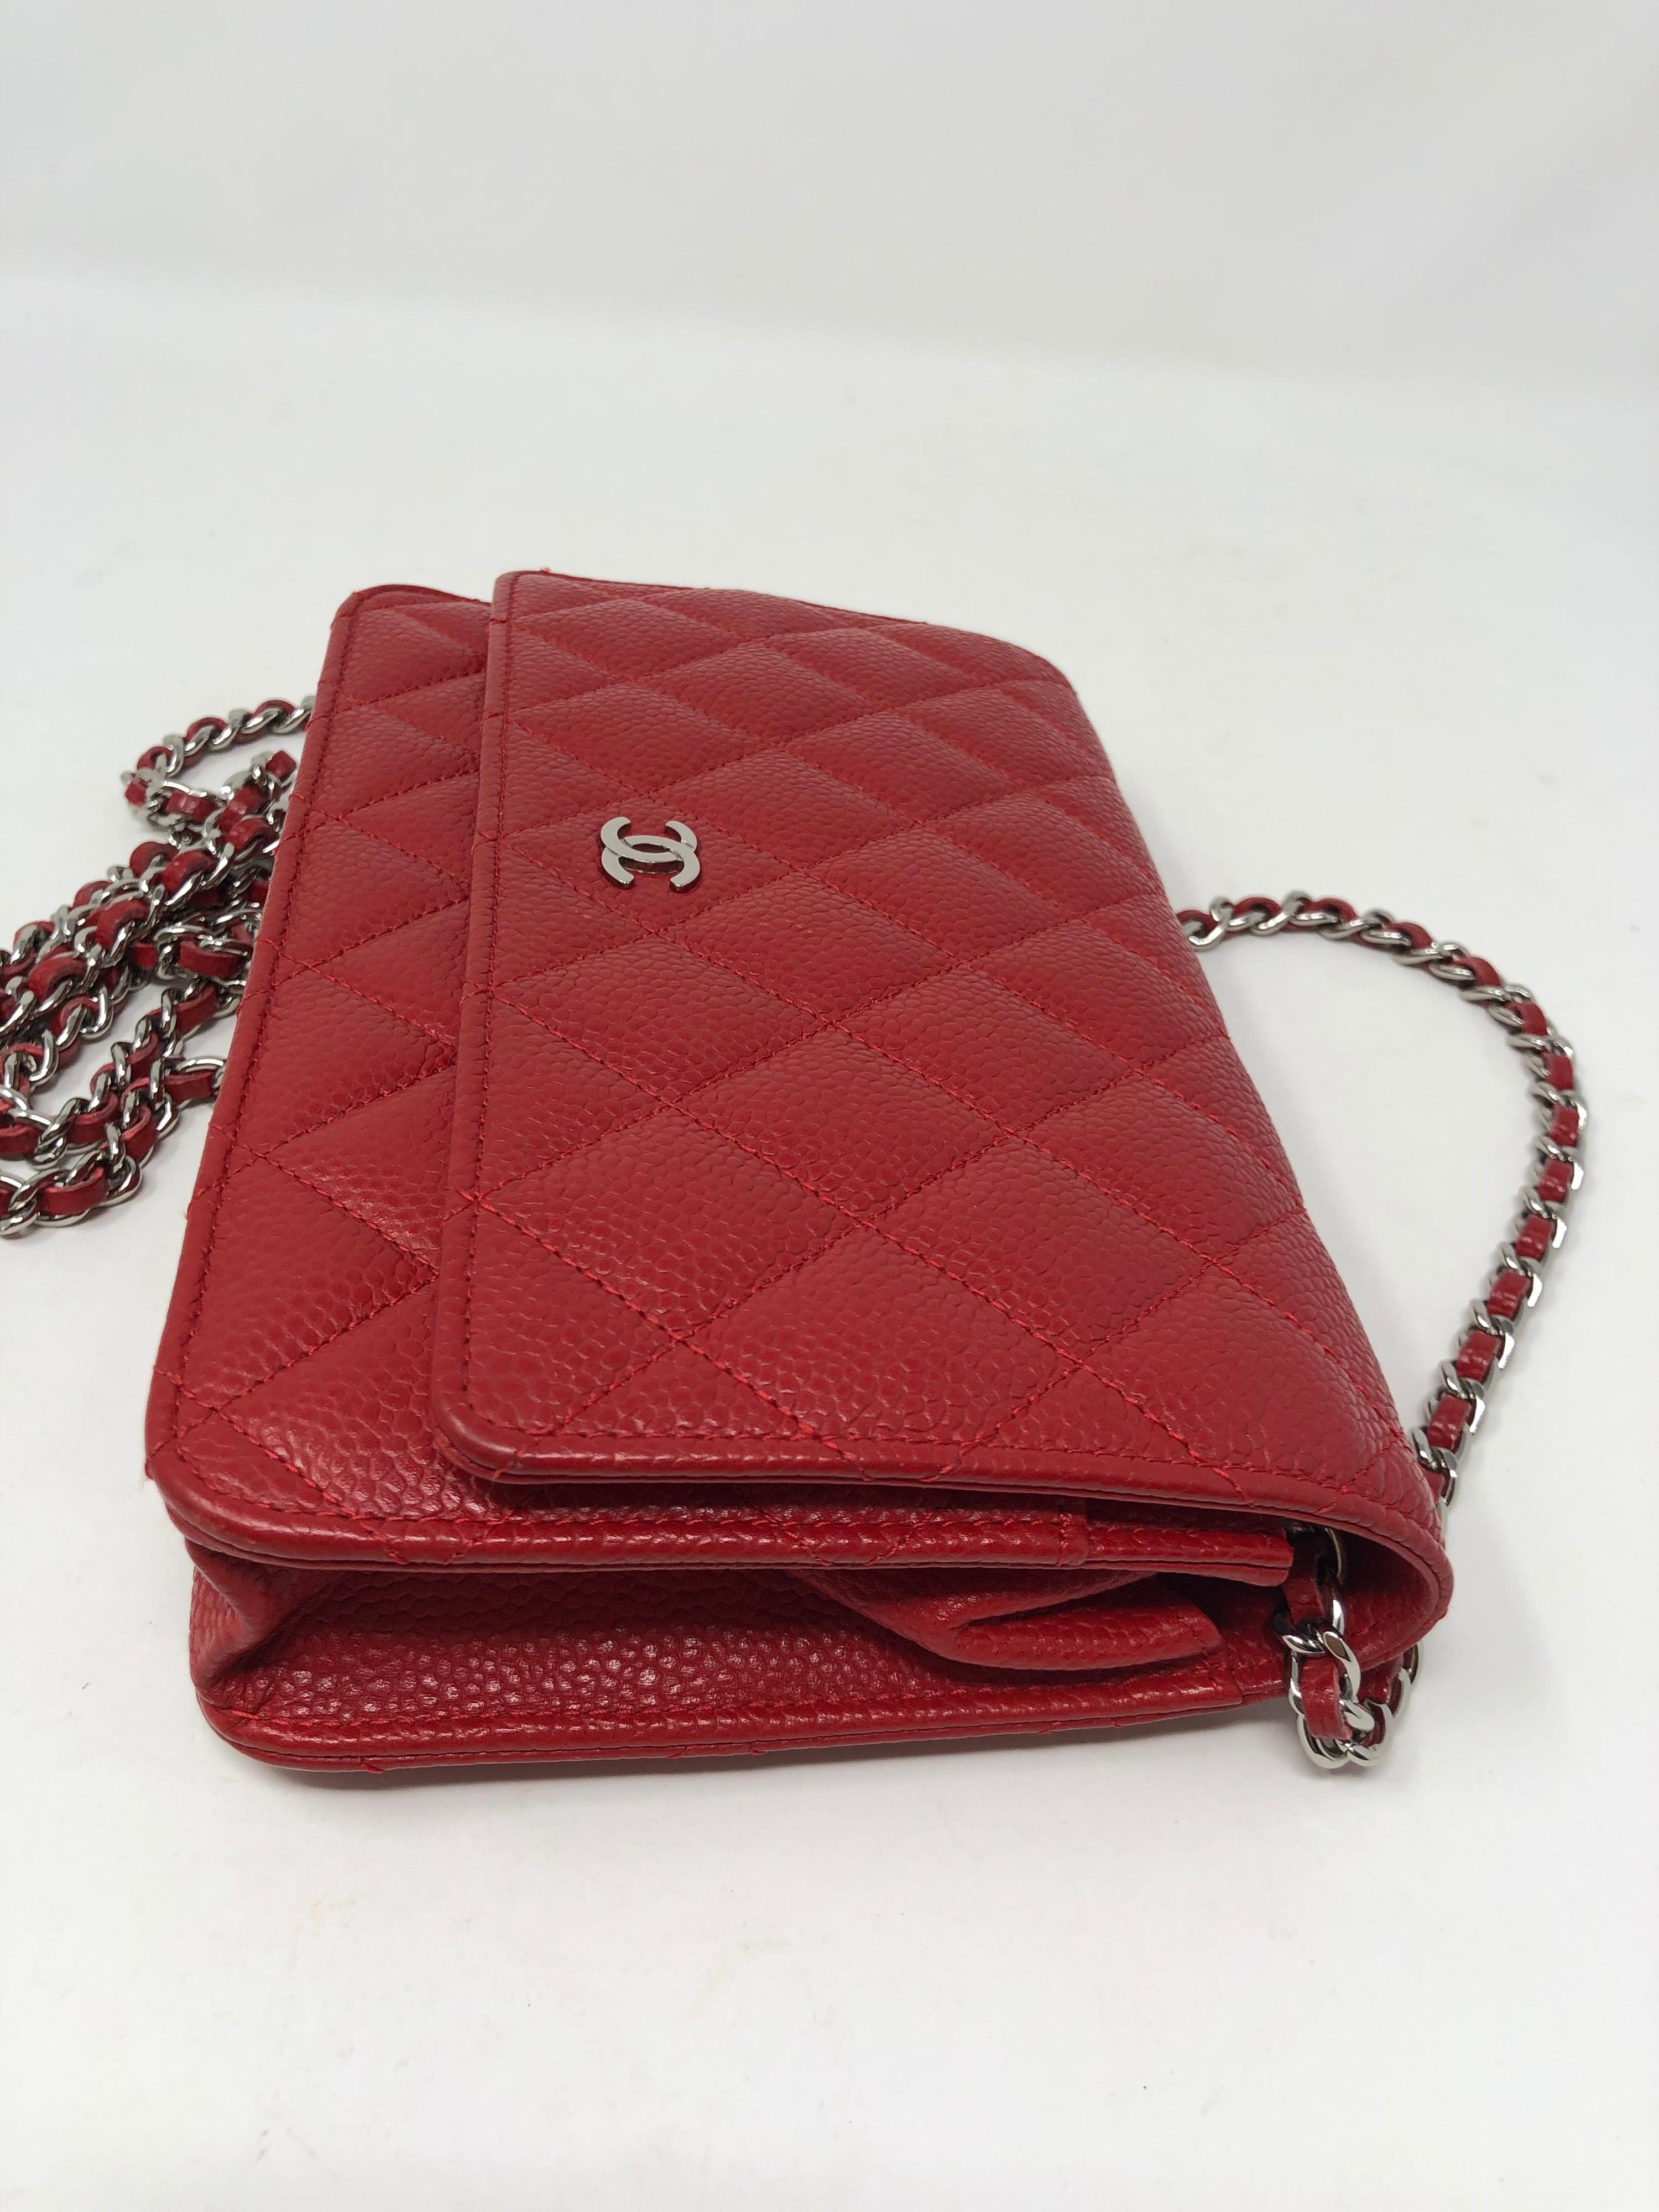 Chanel Red Caviar Wallet On A Chain Bag 3